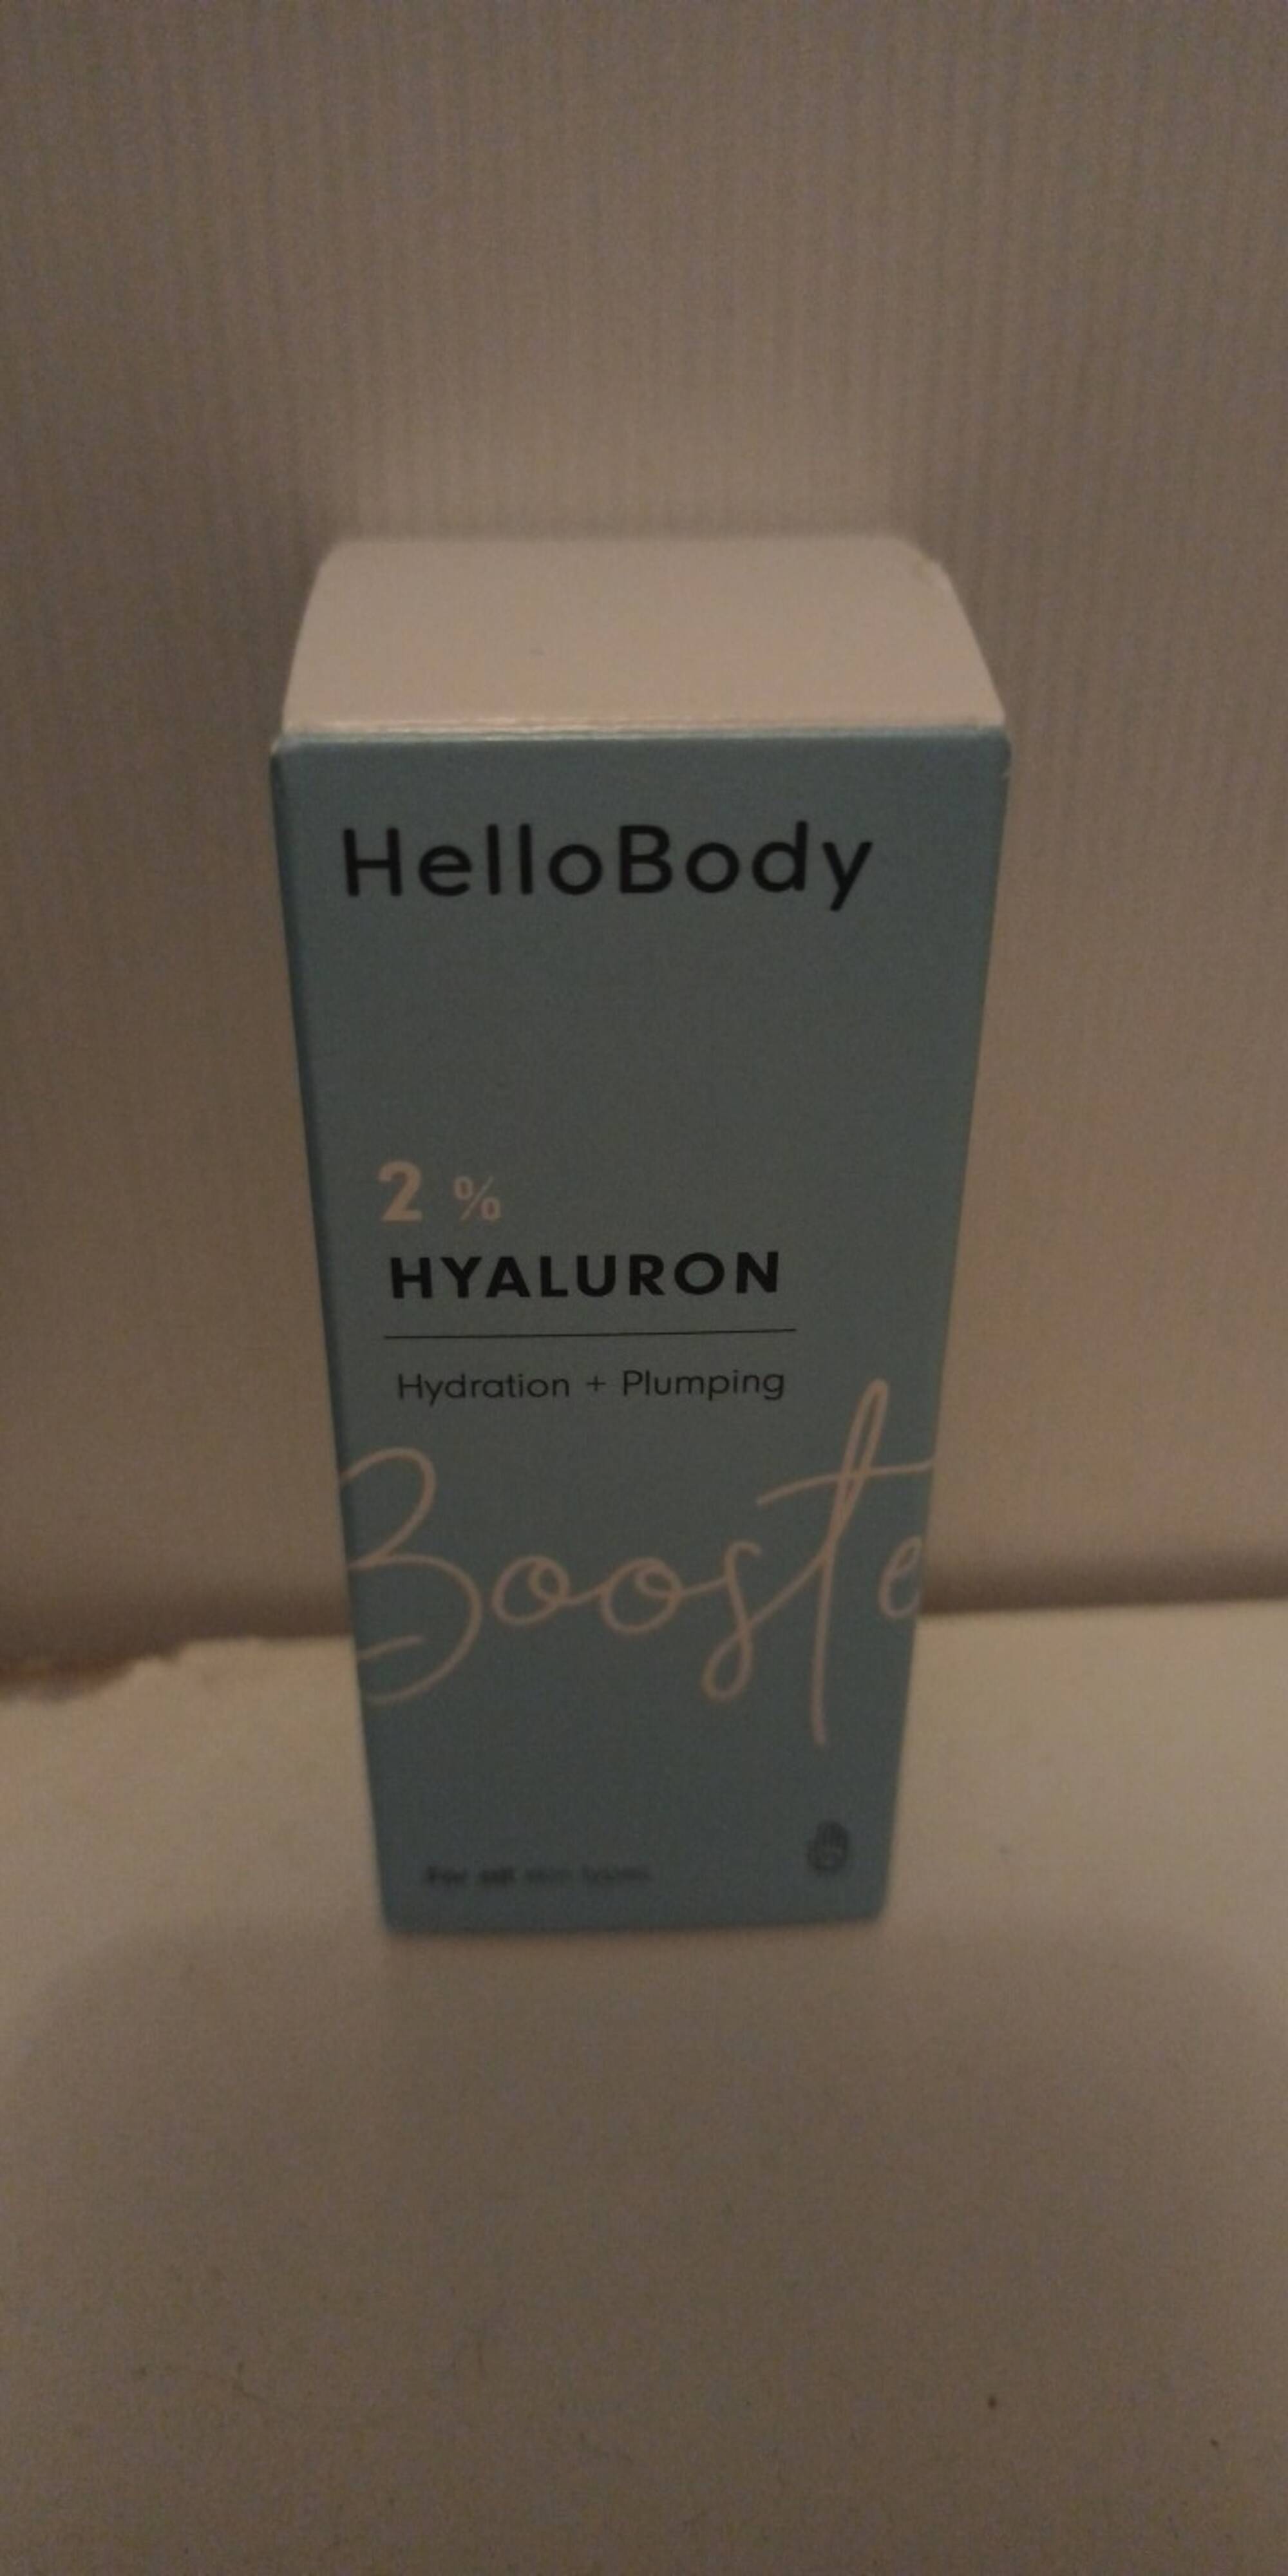 HELLOBODY - 2% Hyaluron -  Booste hydration + plumping